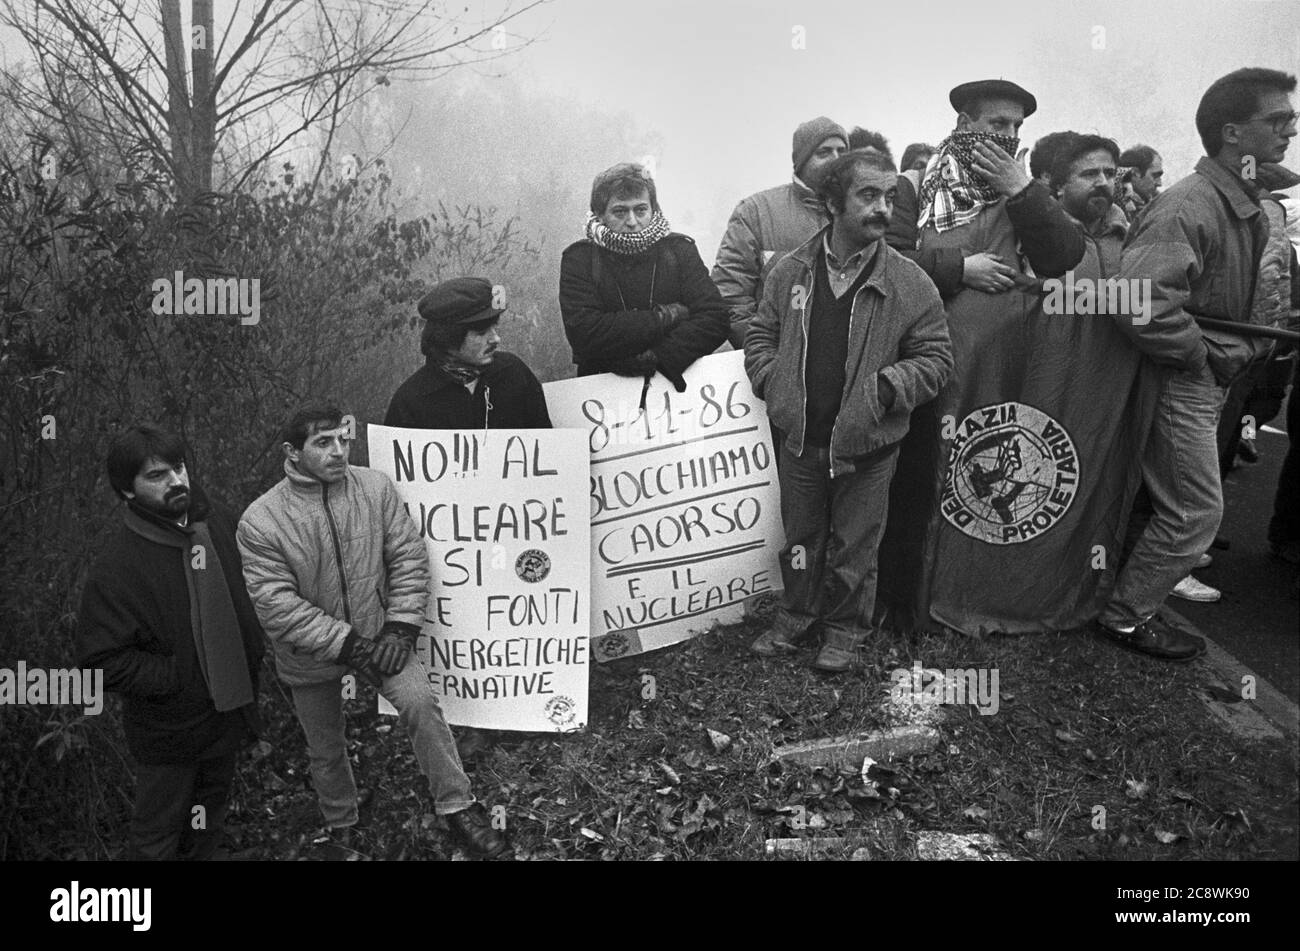 Italy, demonstration against Caorso  nuclear power station  (October 1986) Stock Photo